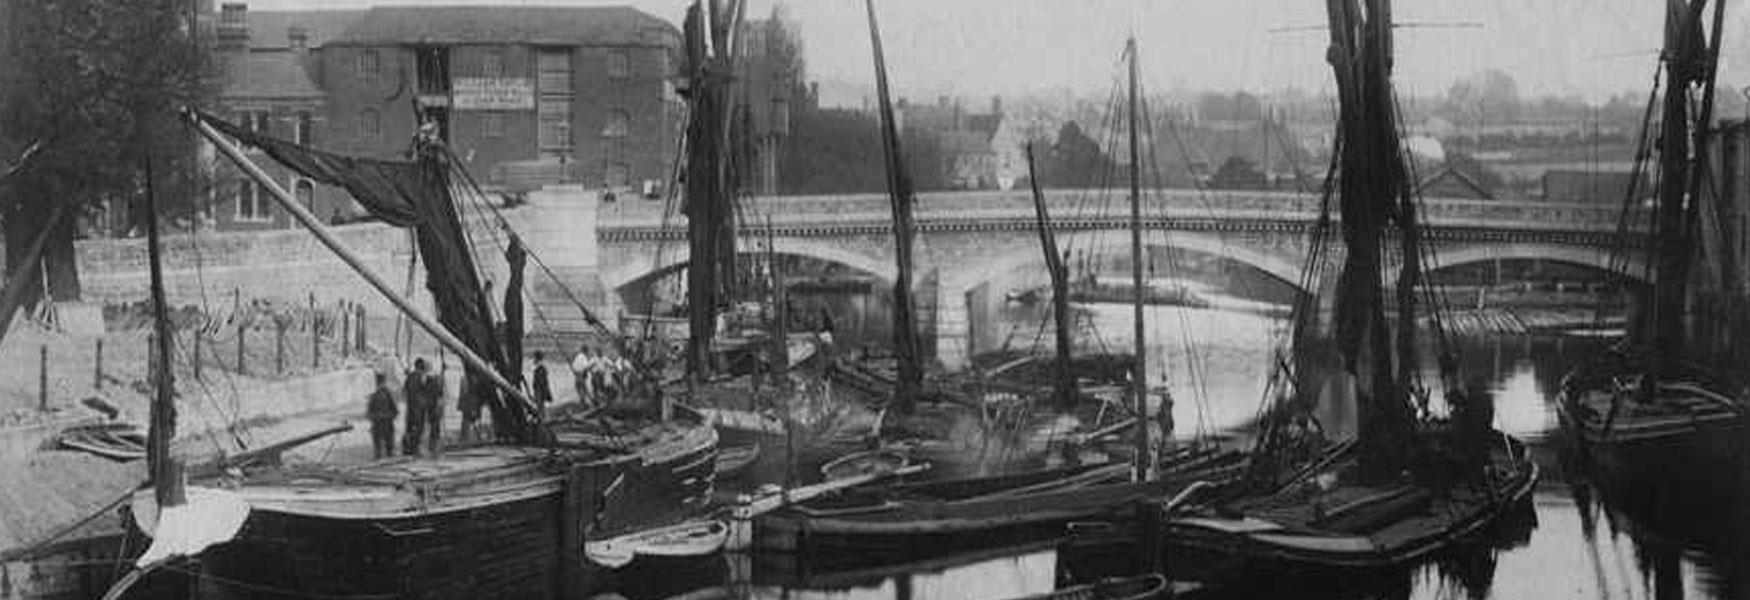 Barges on the River Medway were a common site.  The loading docks and industrial wharfs shifted goods from Kent to London and beyond.  They were a vital part of Maidstone's growth and history.